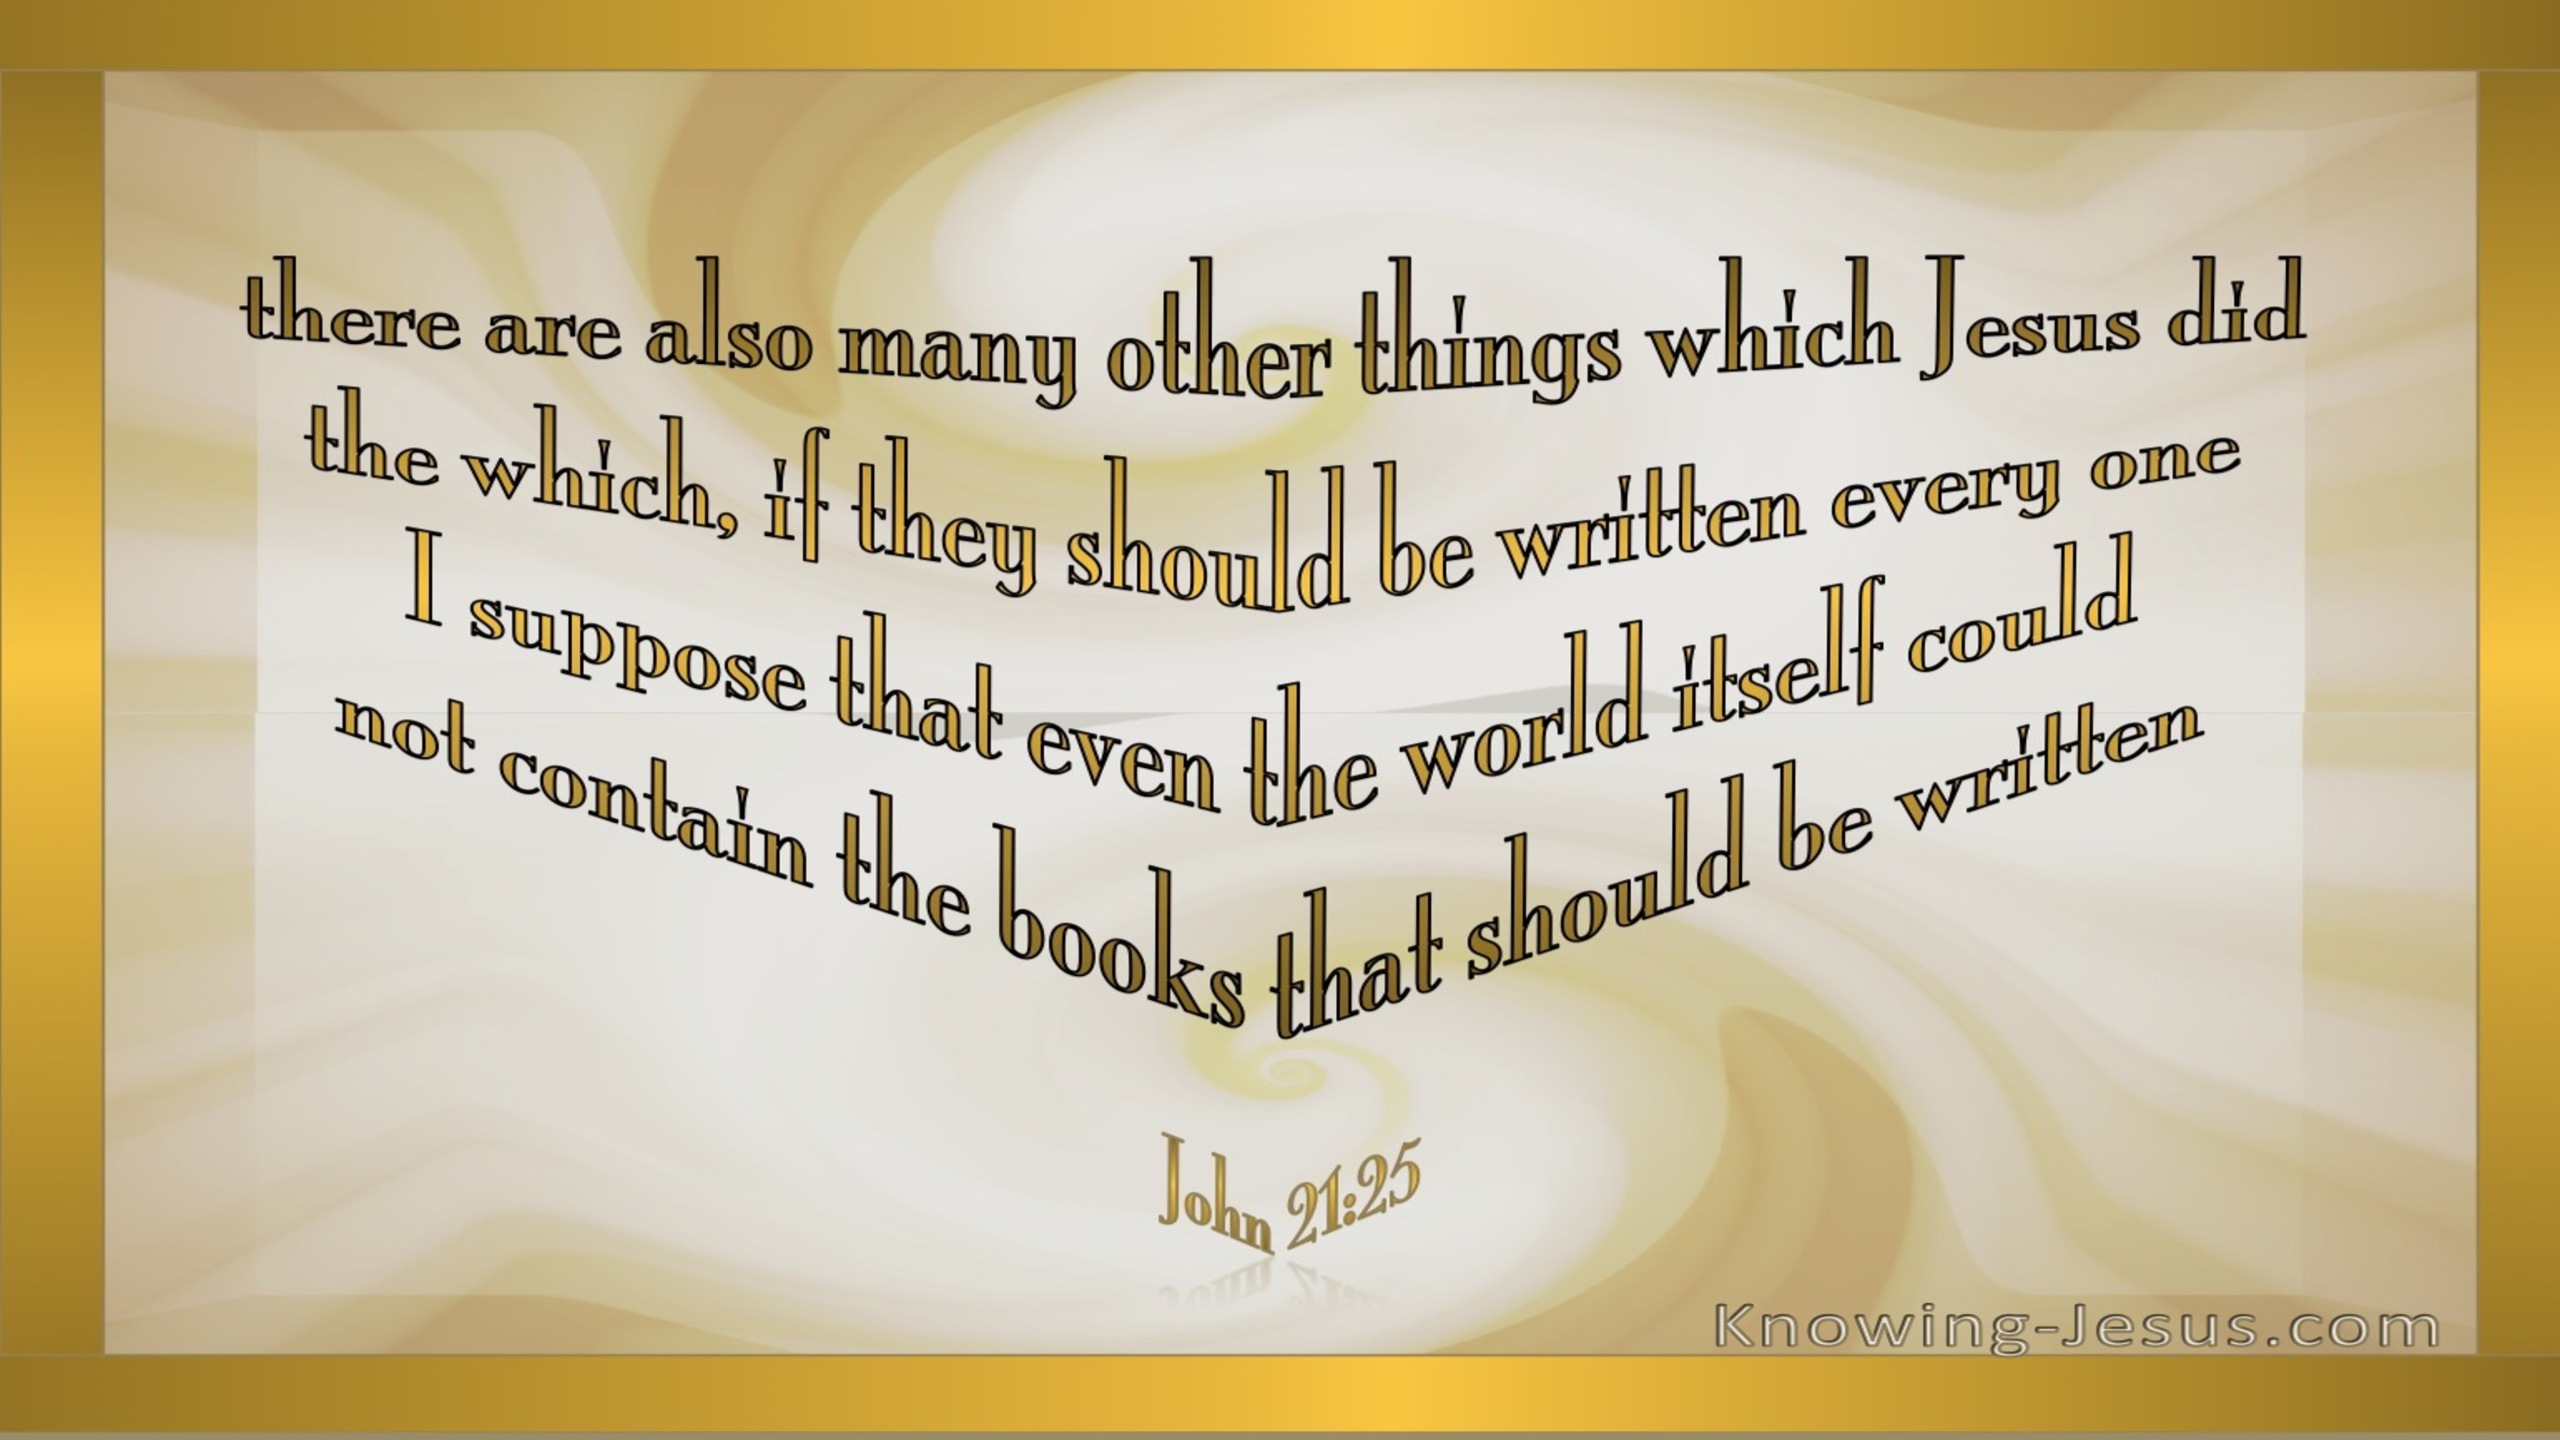 John 21:25 Many Other Things Jesus Did (gold)